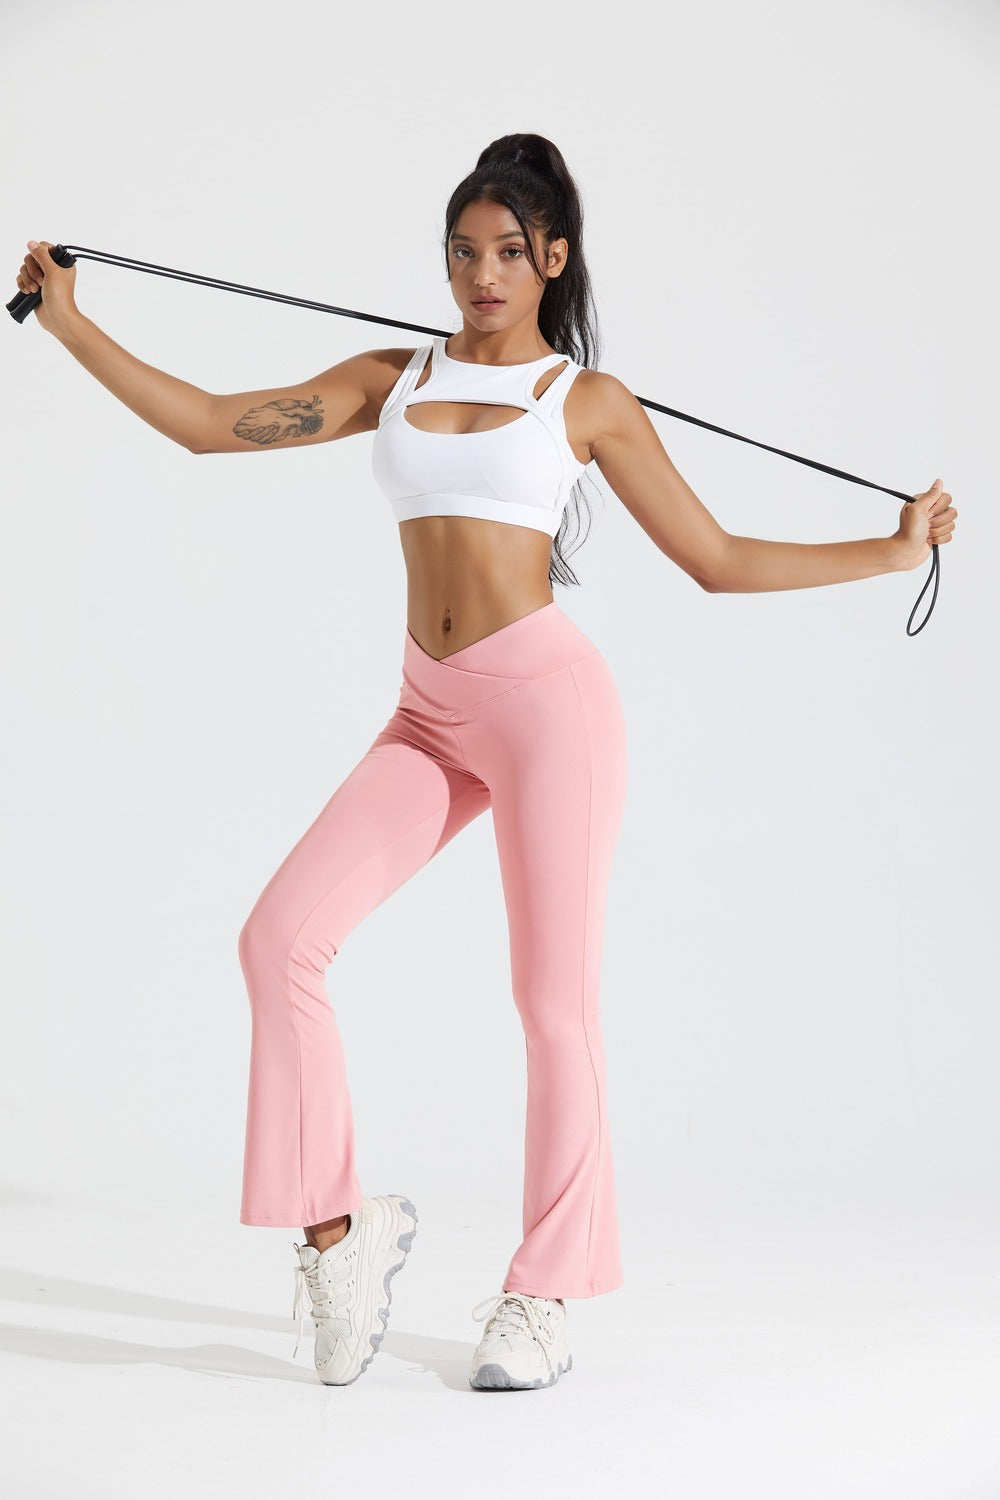 High Waist Wide Leg Flare Leggings For Women Lu 088 Groove Fitness Gym Yoga  Pants, Thin Summer Dress With Elastic Waiter Low Rise Skirt From  Anapples456, $14.83